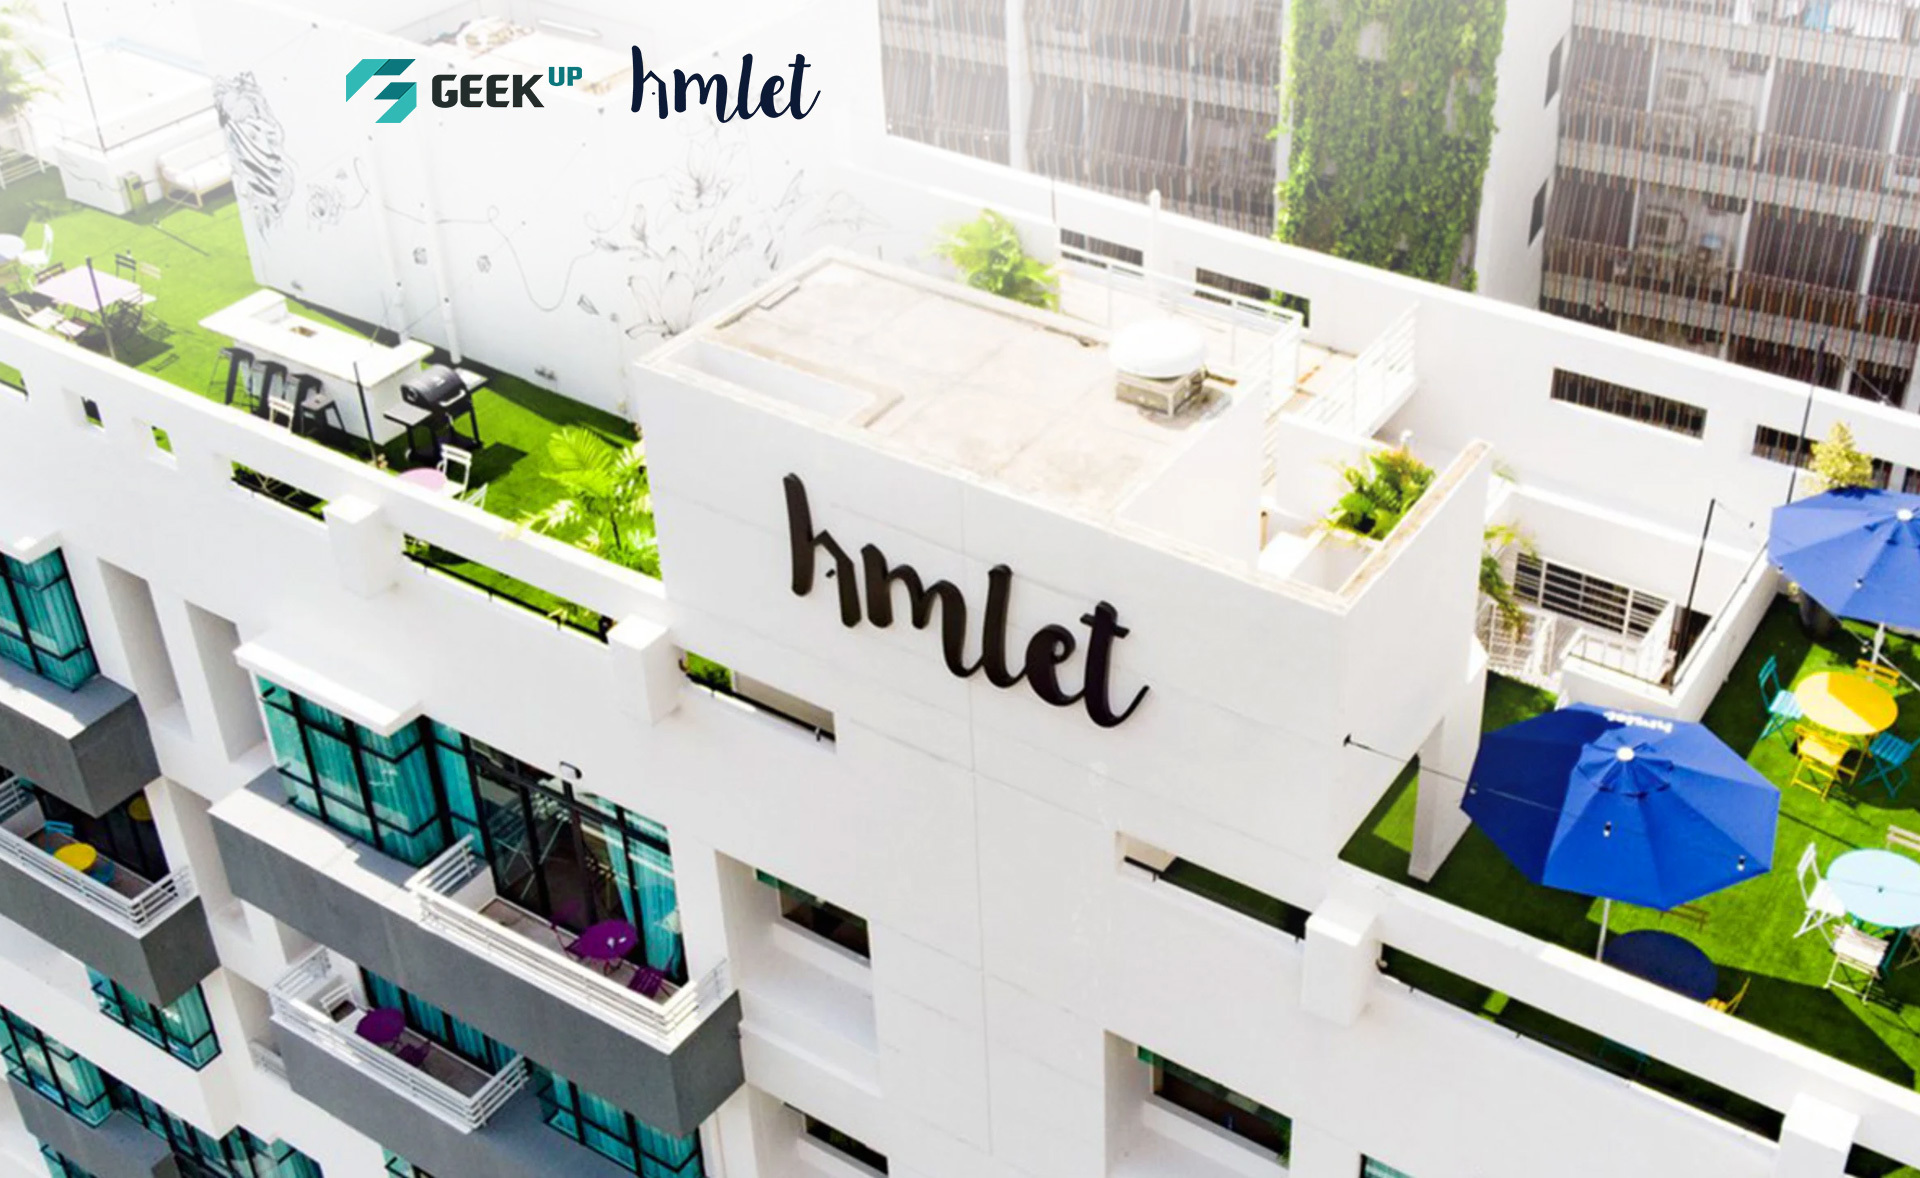 Managing frontend & backend system for Hmlet - the fastest-growing co-living startup in the Asia Pacific